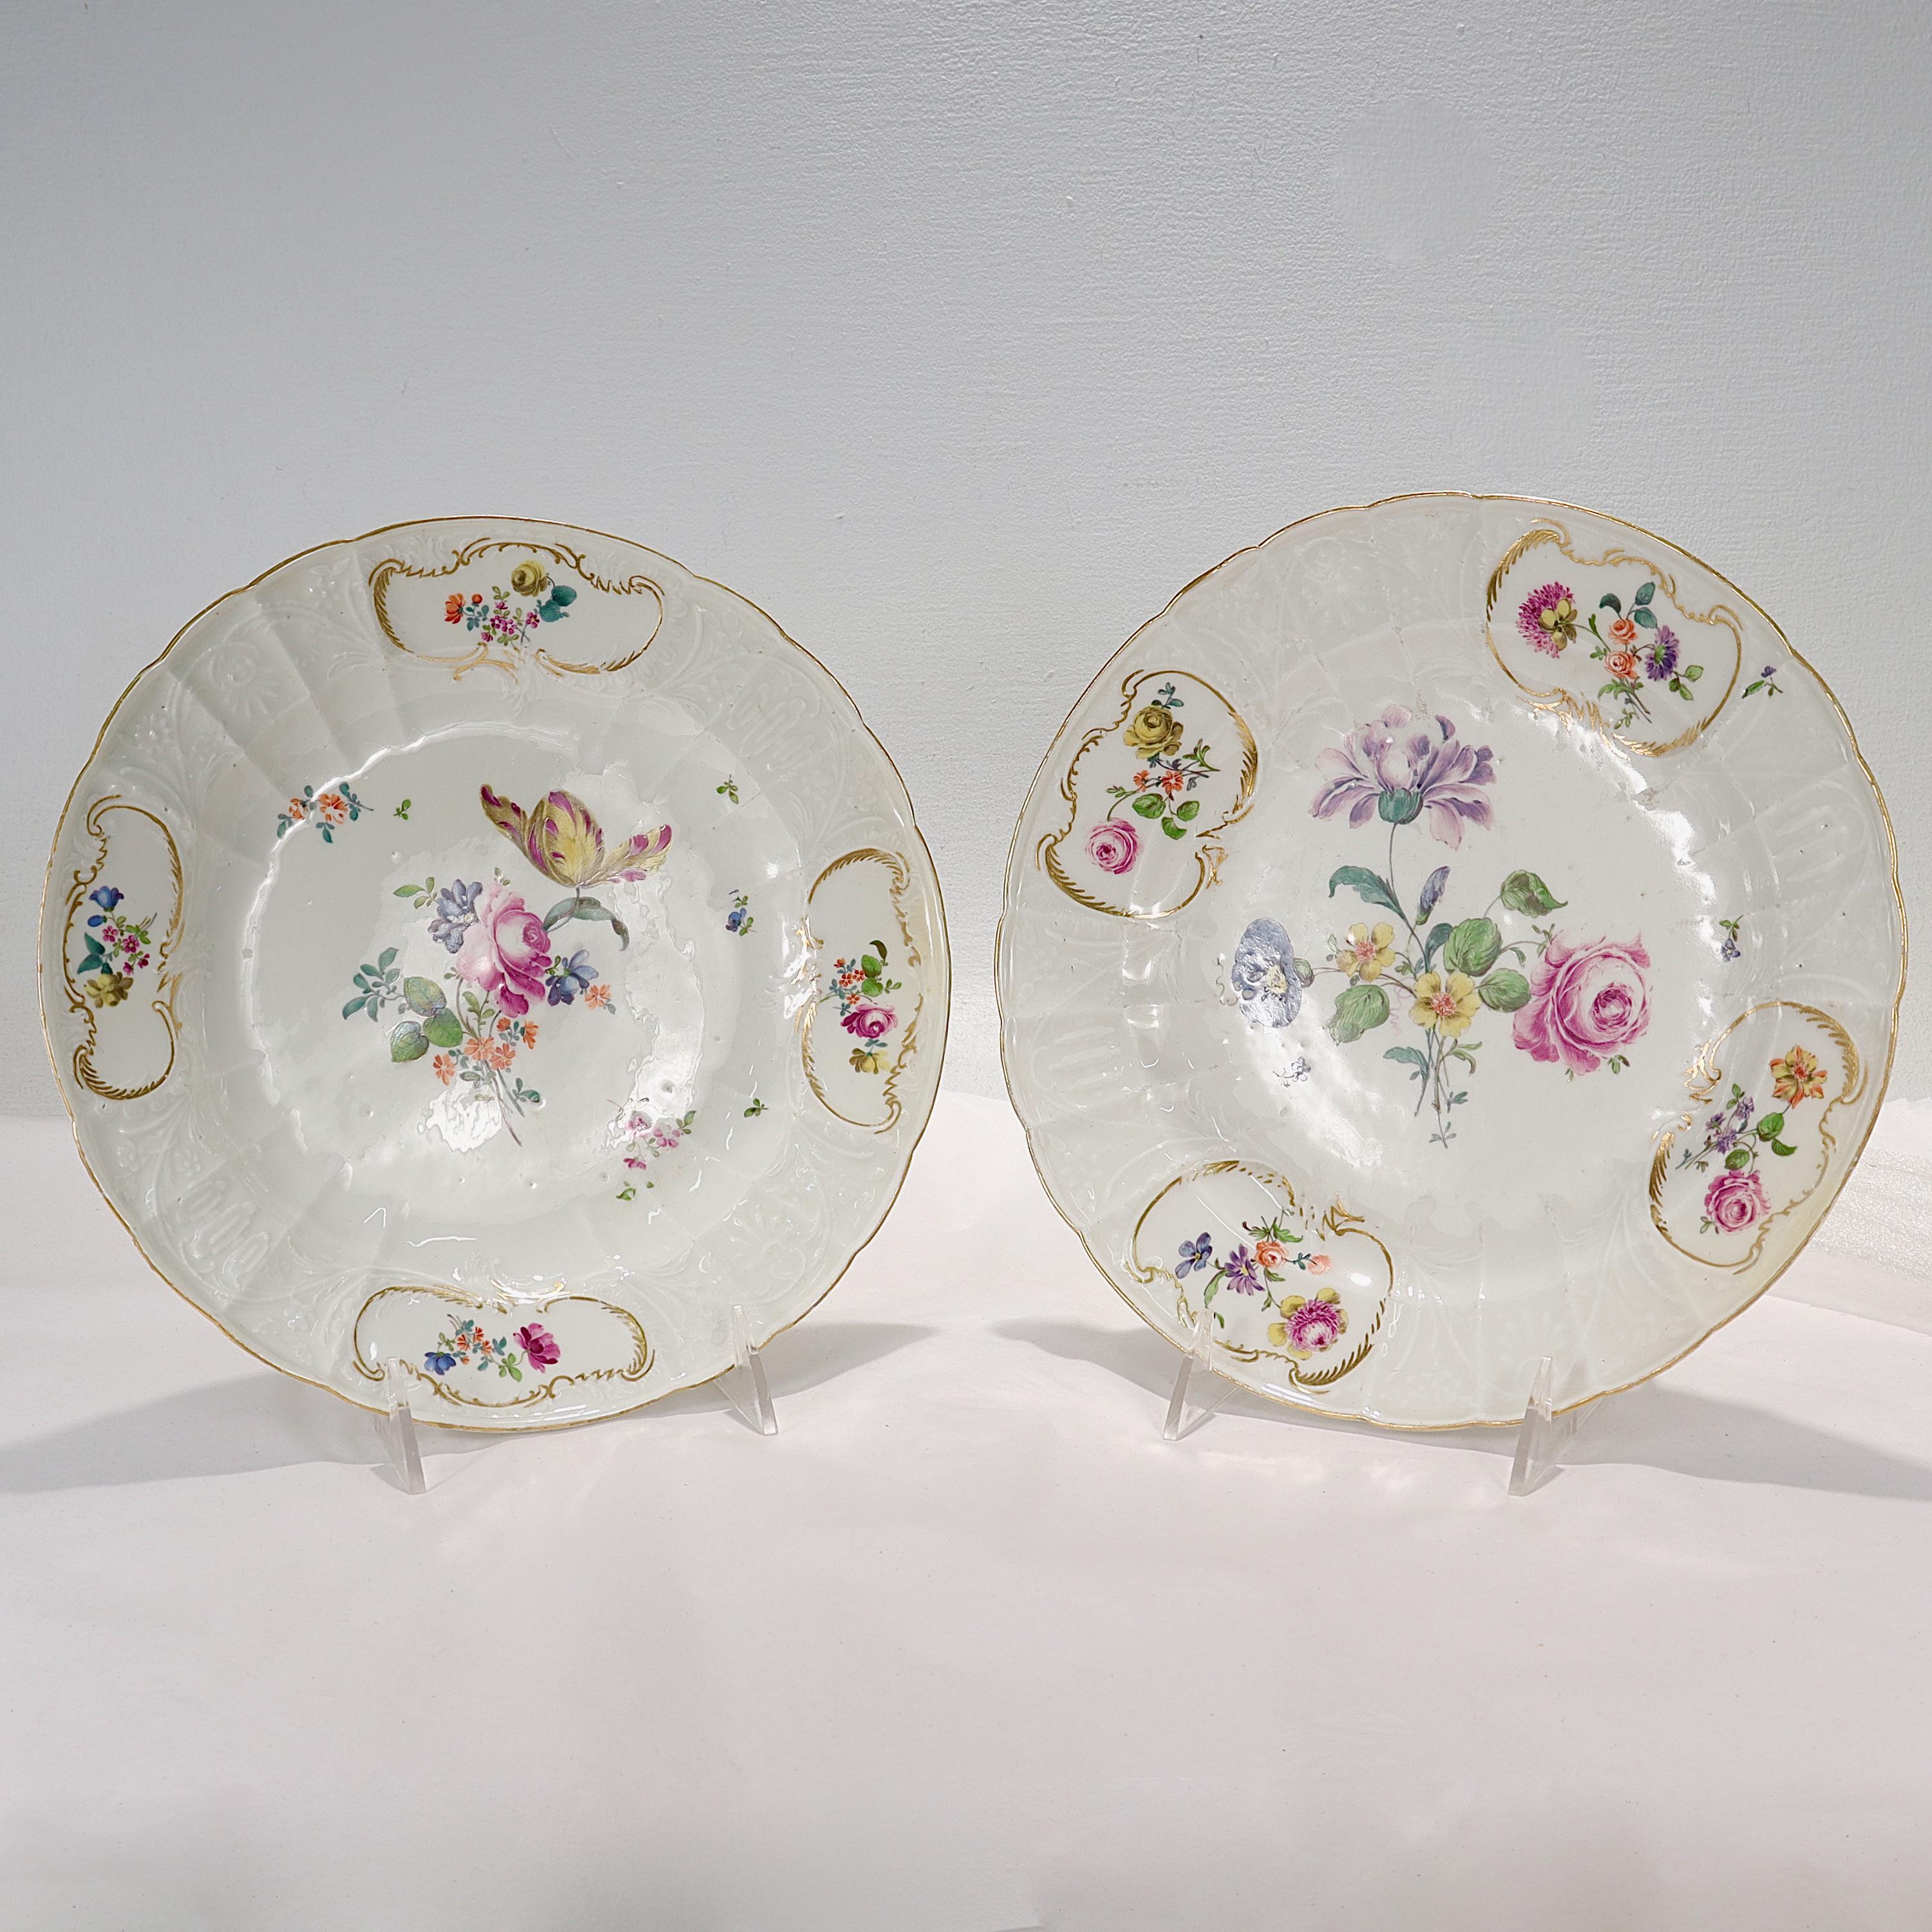 Rococo Pair Antique 18th C. Meissen Porcelain Dulong Variant Molded Plates with Flowers For Sale